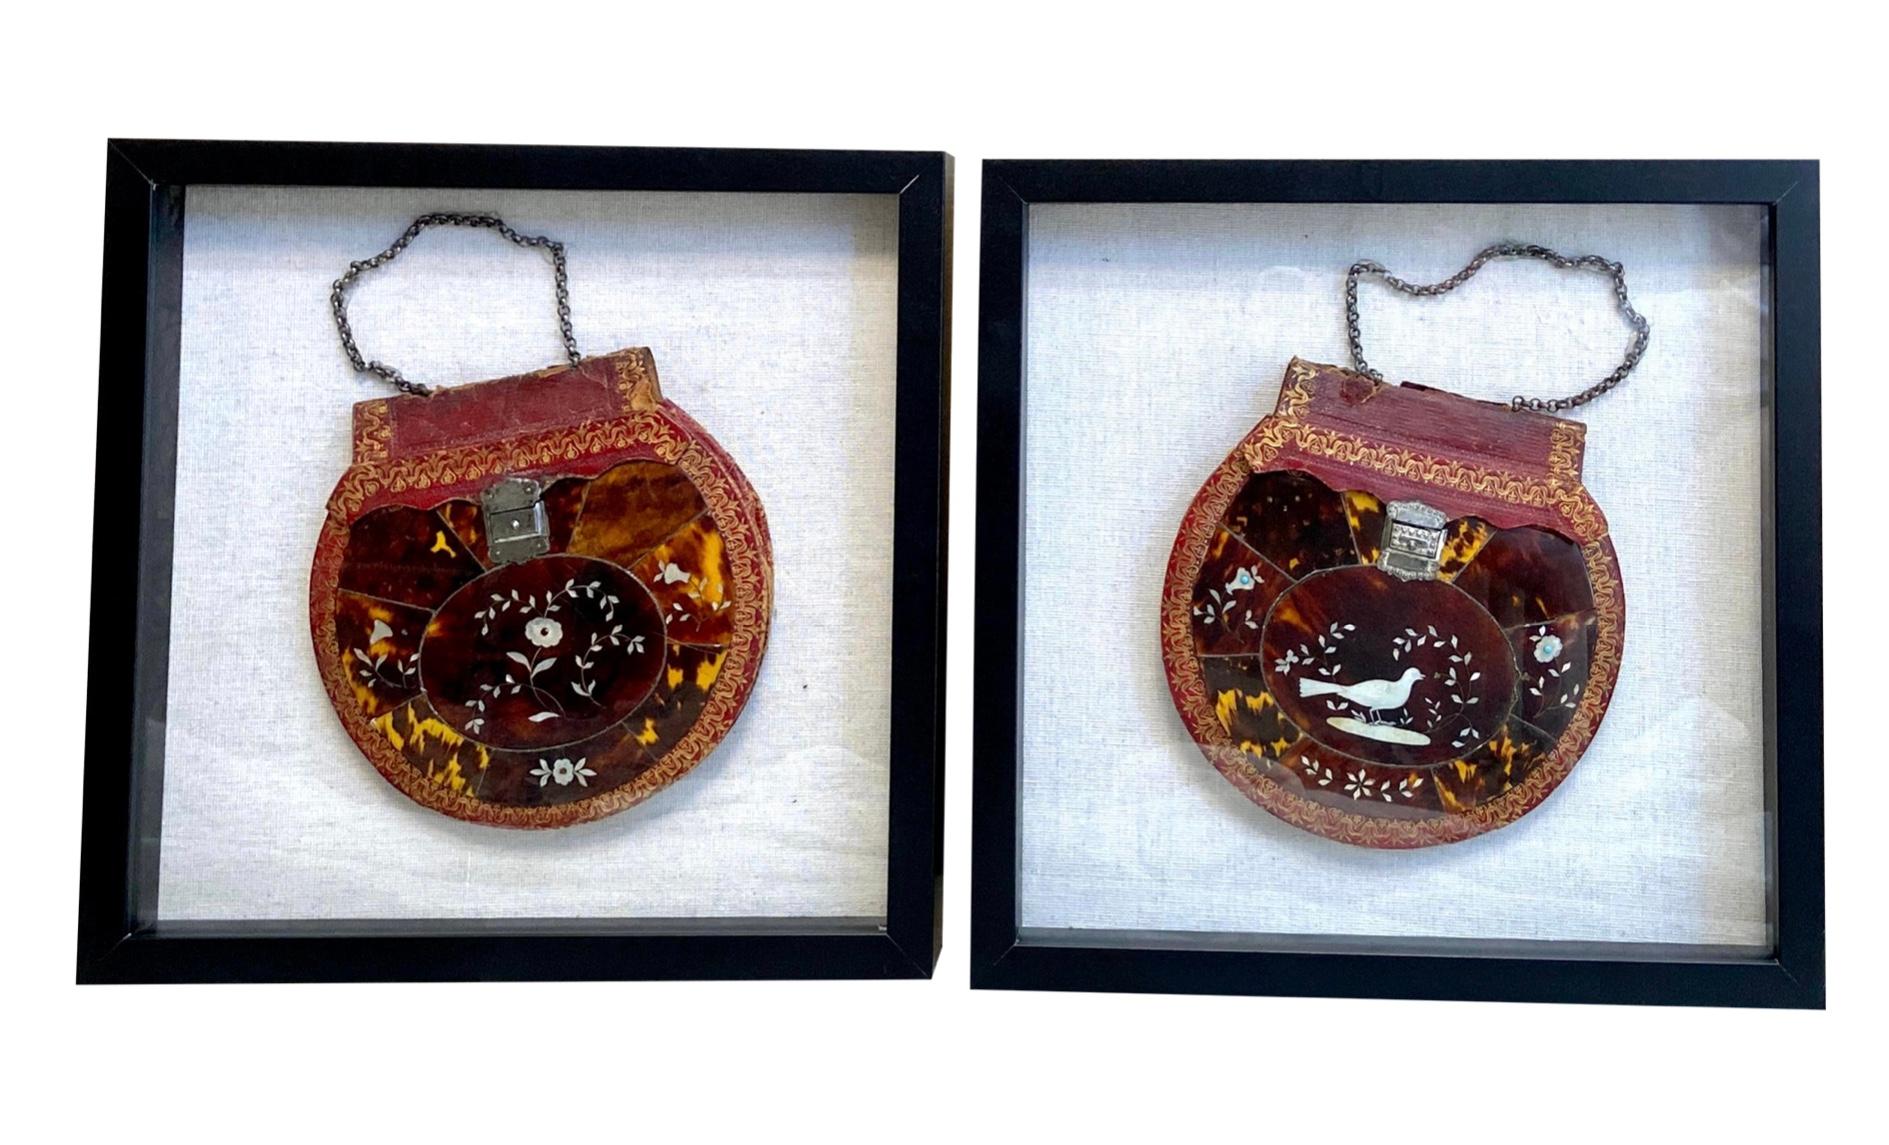 Tortoise Shell Turtle Shell with Mother of Pearl and Silver Inlay Purse Mounted in Shadowboxes For Sale